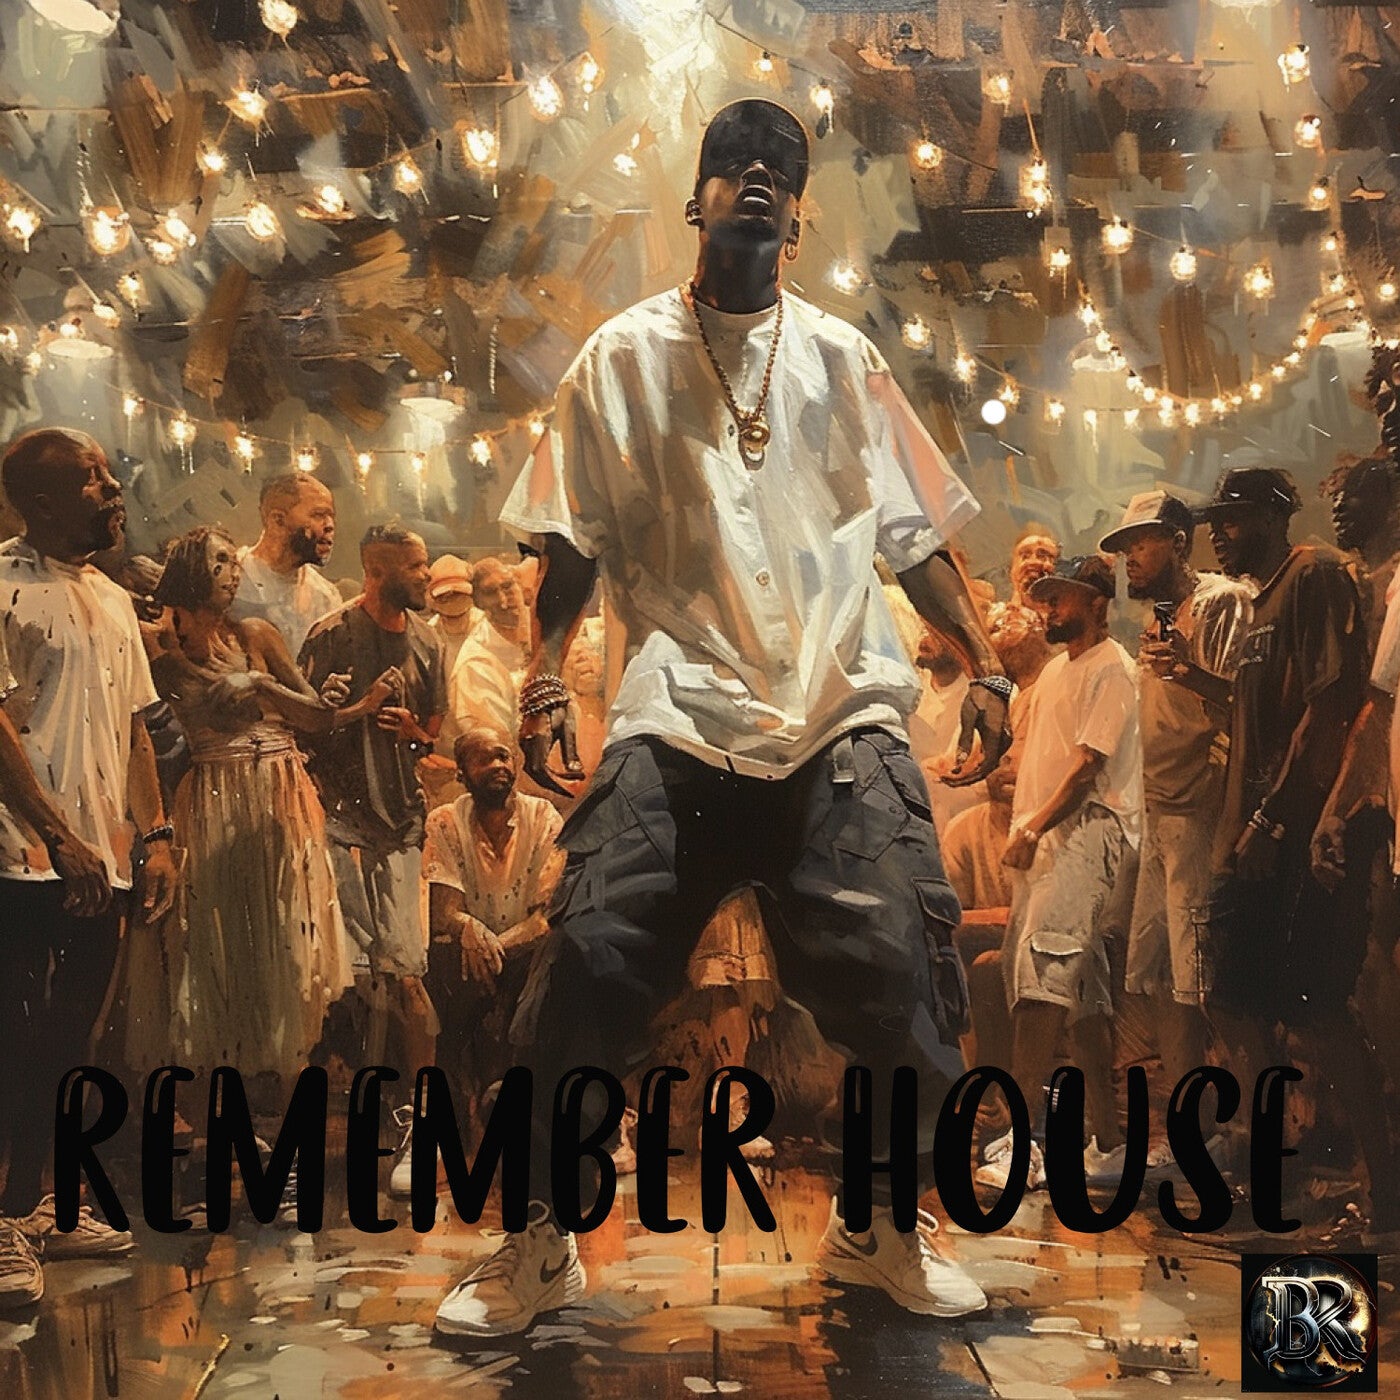 Remember House